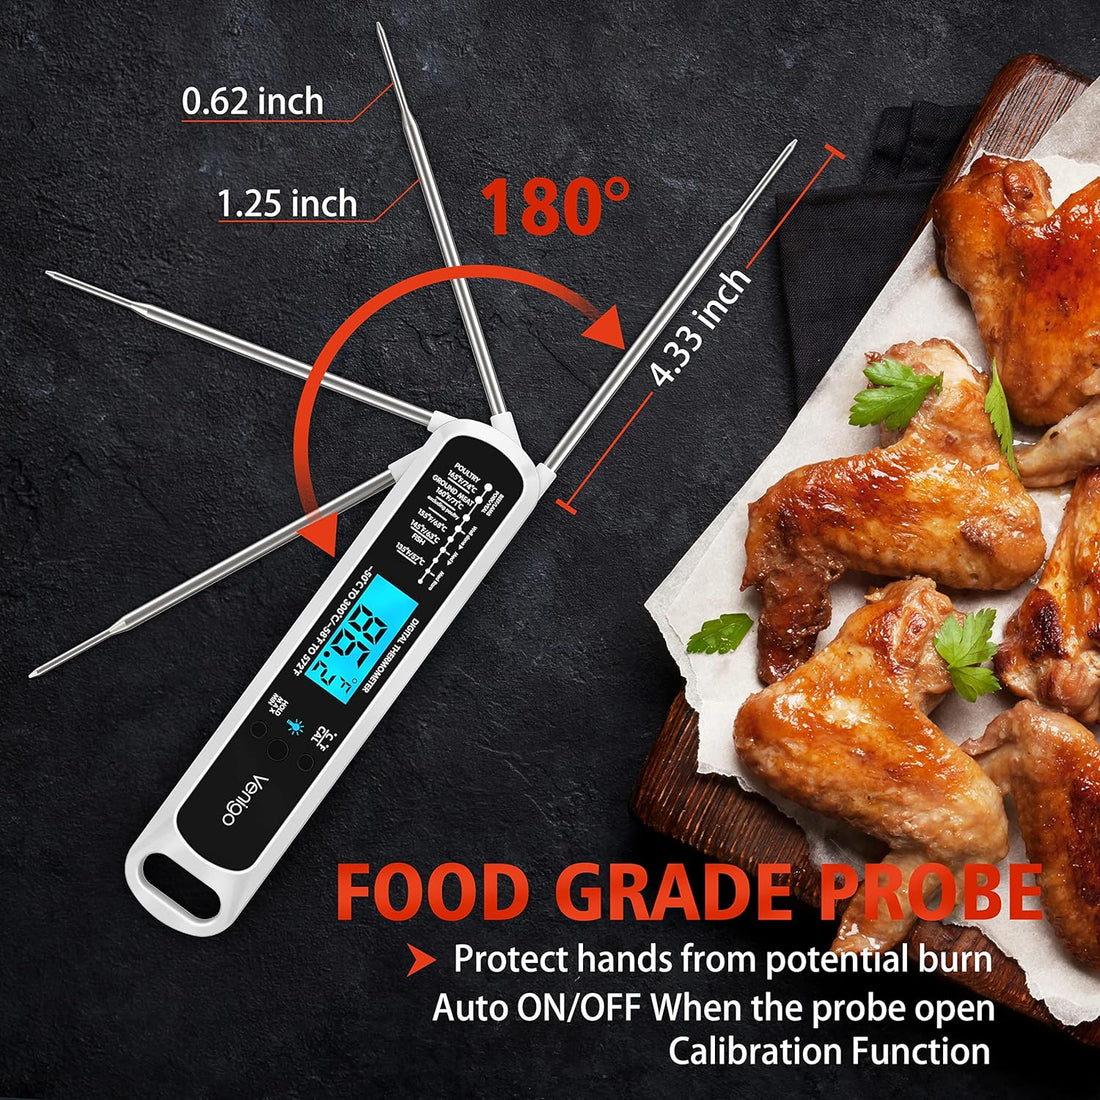 Venigo Digital Meat and Food Thermometer for Cooking and Grilling, Waterproof Instant-Read Cooking Thermometer, Kitchen Probe Thermometer for Baking, Roasting, Smoking, Deep Frying (White)